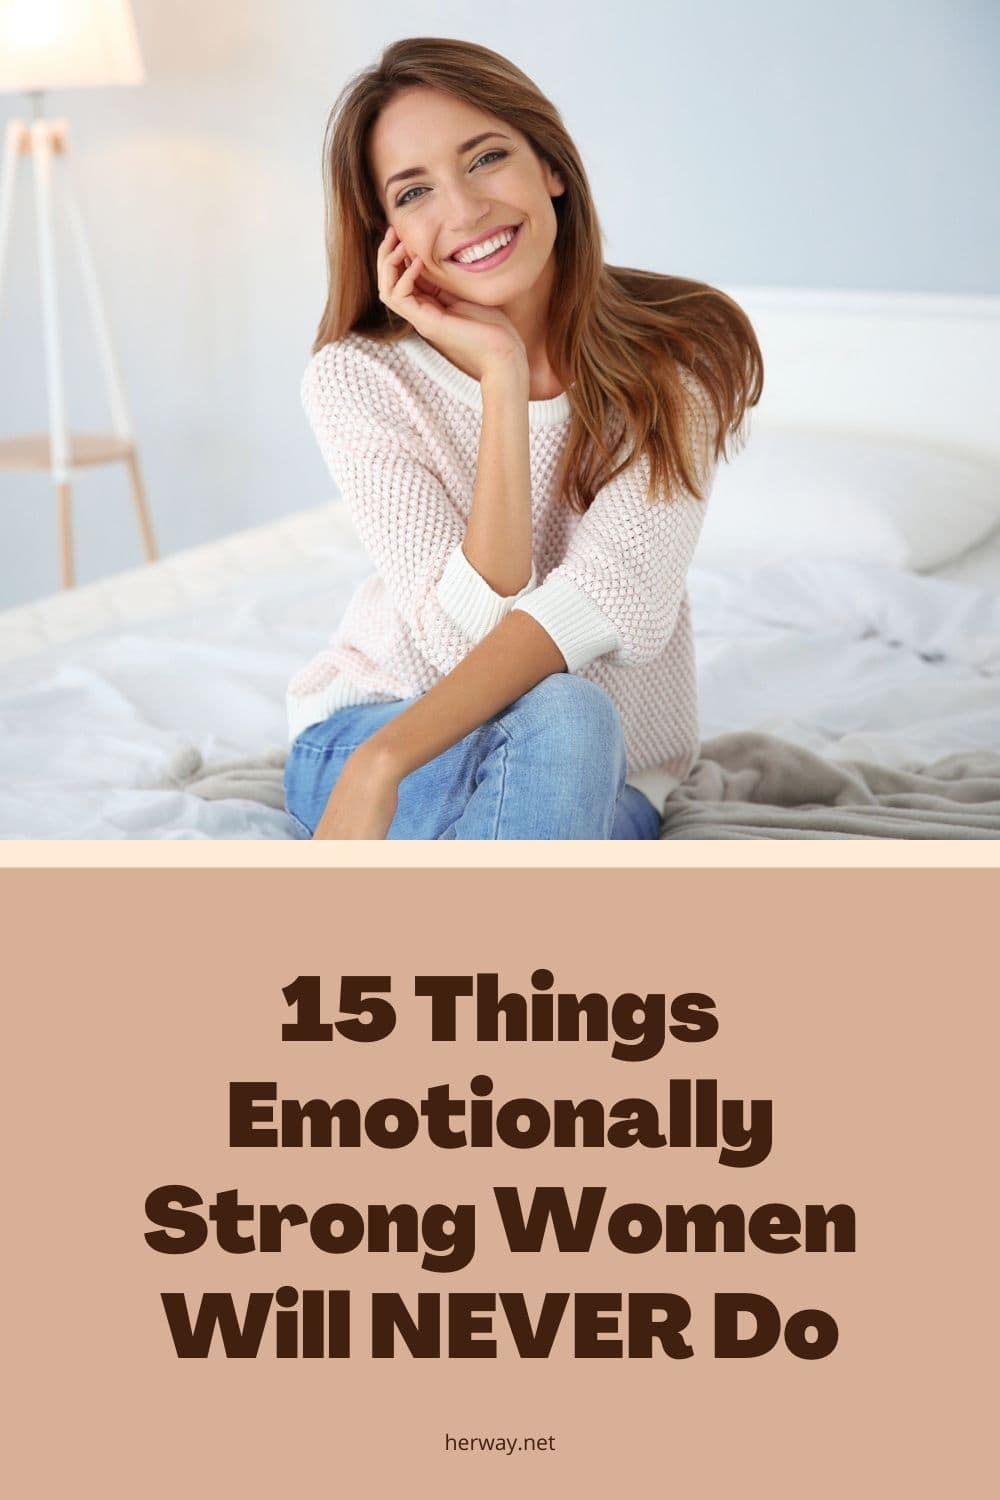 15 Things Emotionally Strong Women Will NEVER Do